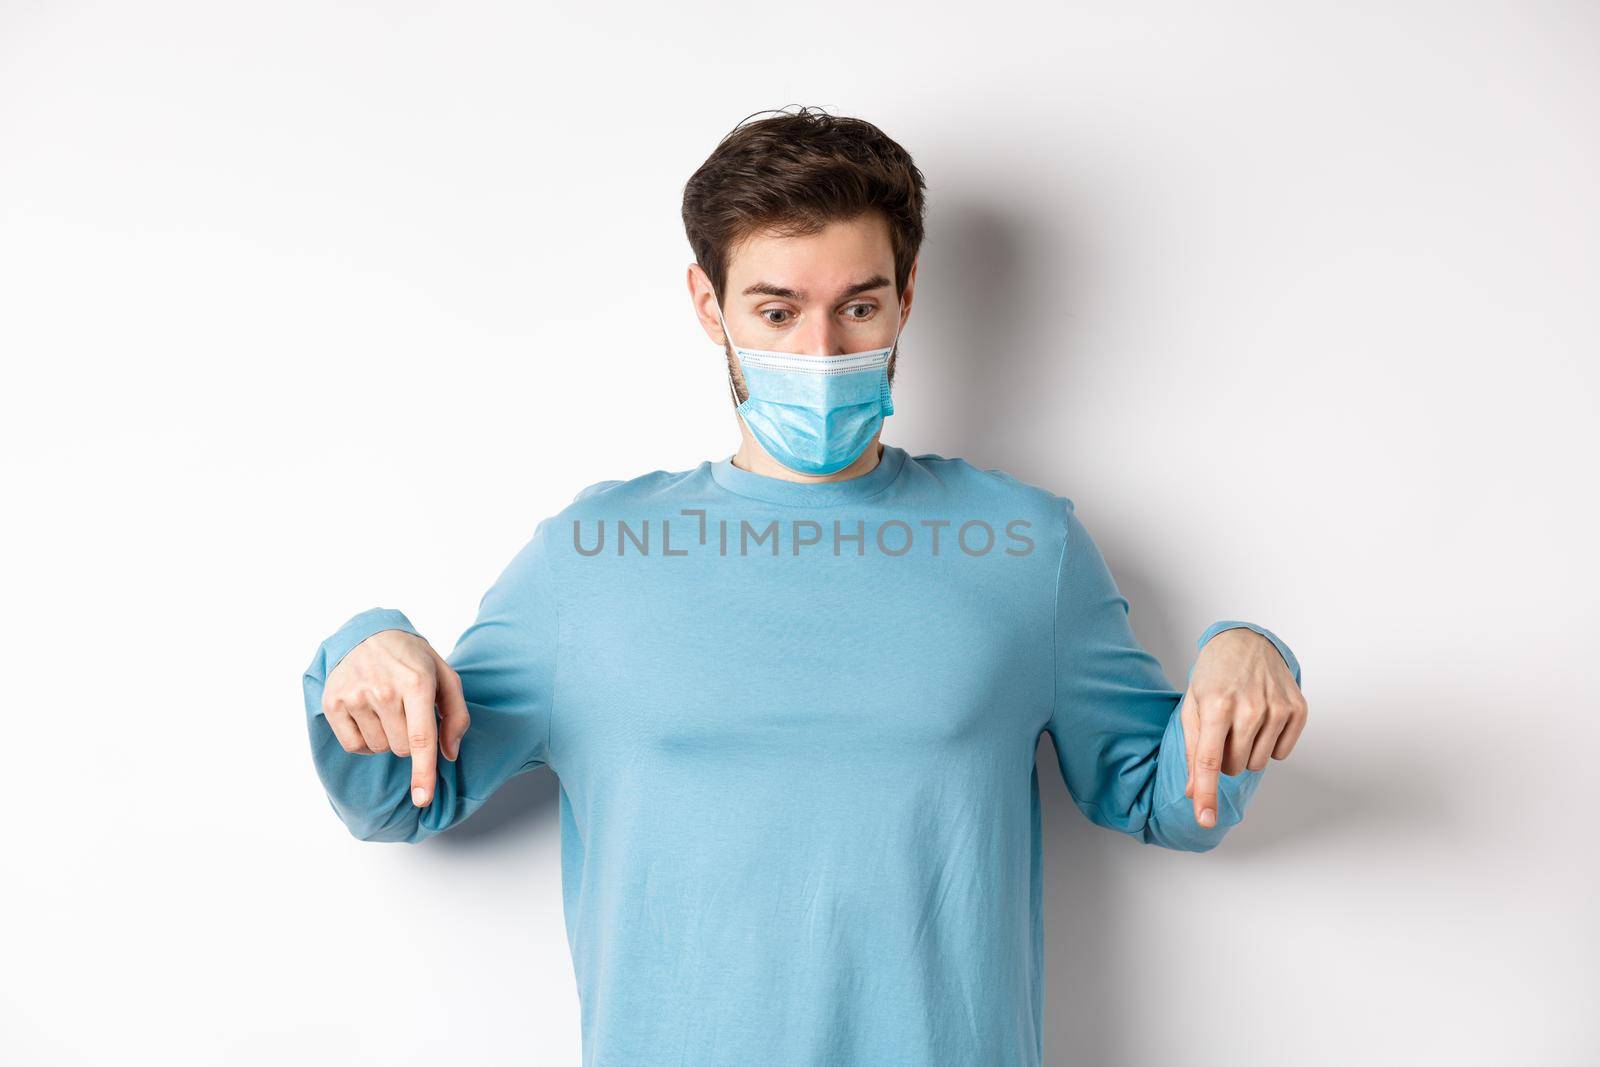 Covid-19, health and quarantine concept. Curious man checking out advertisement, pointing and looking down, wearing medical mask with casual blue sweatshirt, white background.